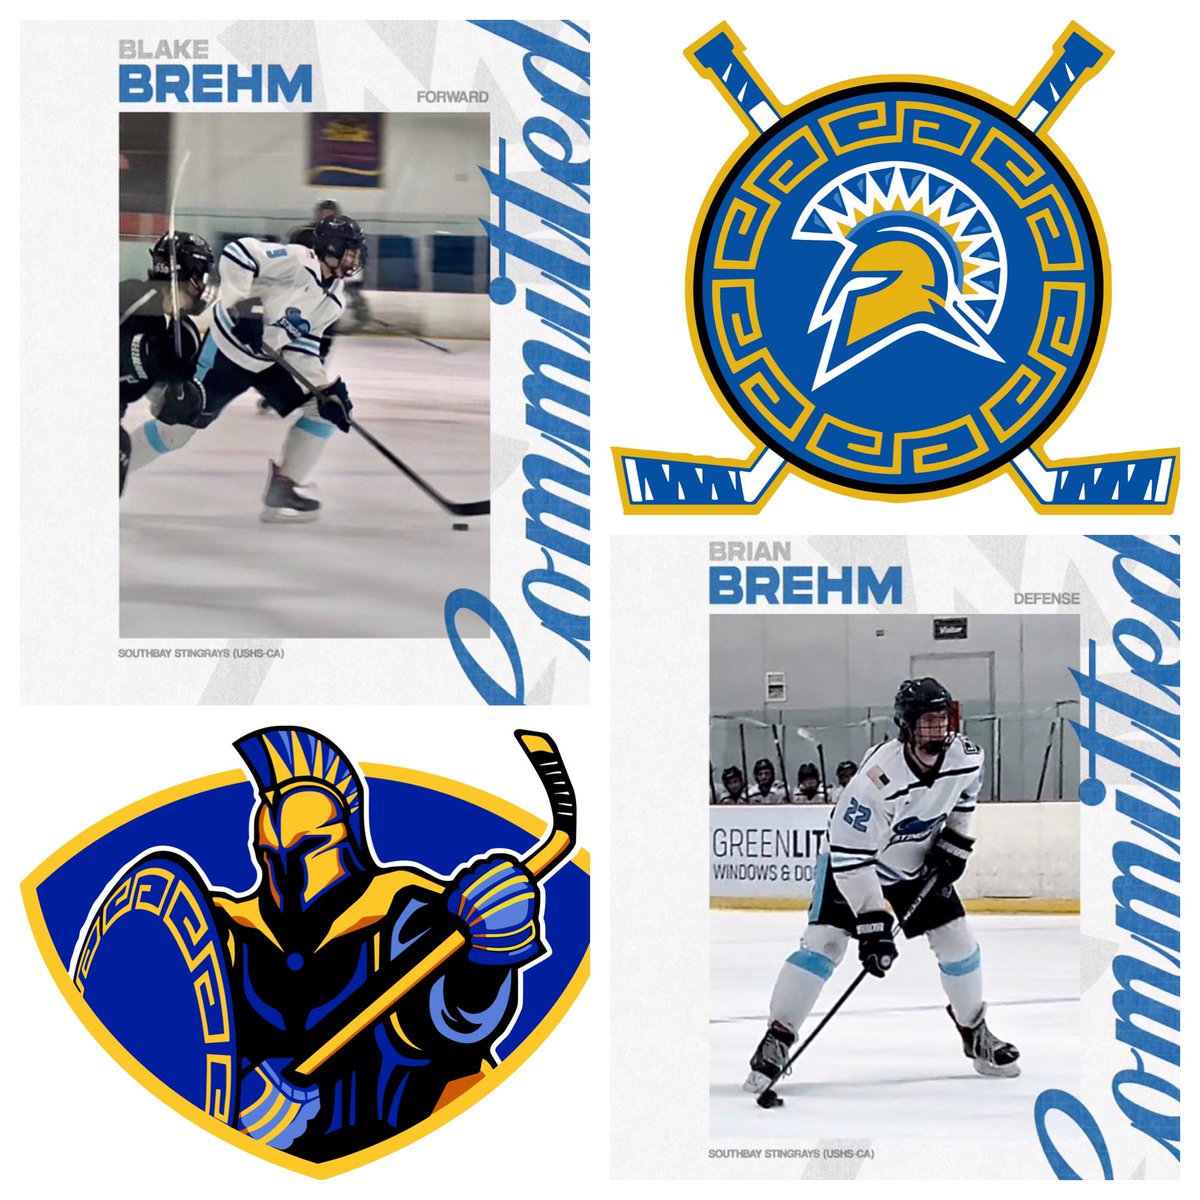 So proud and excited that my twin grandsons committed to SJSU. @SJSU @SJSUHockey Will be so nice to see them play at this level and see old friends at the San Jose Sharks @SanJoseSharks #blakebrehm #brianbrehm